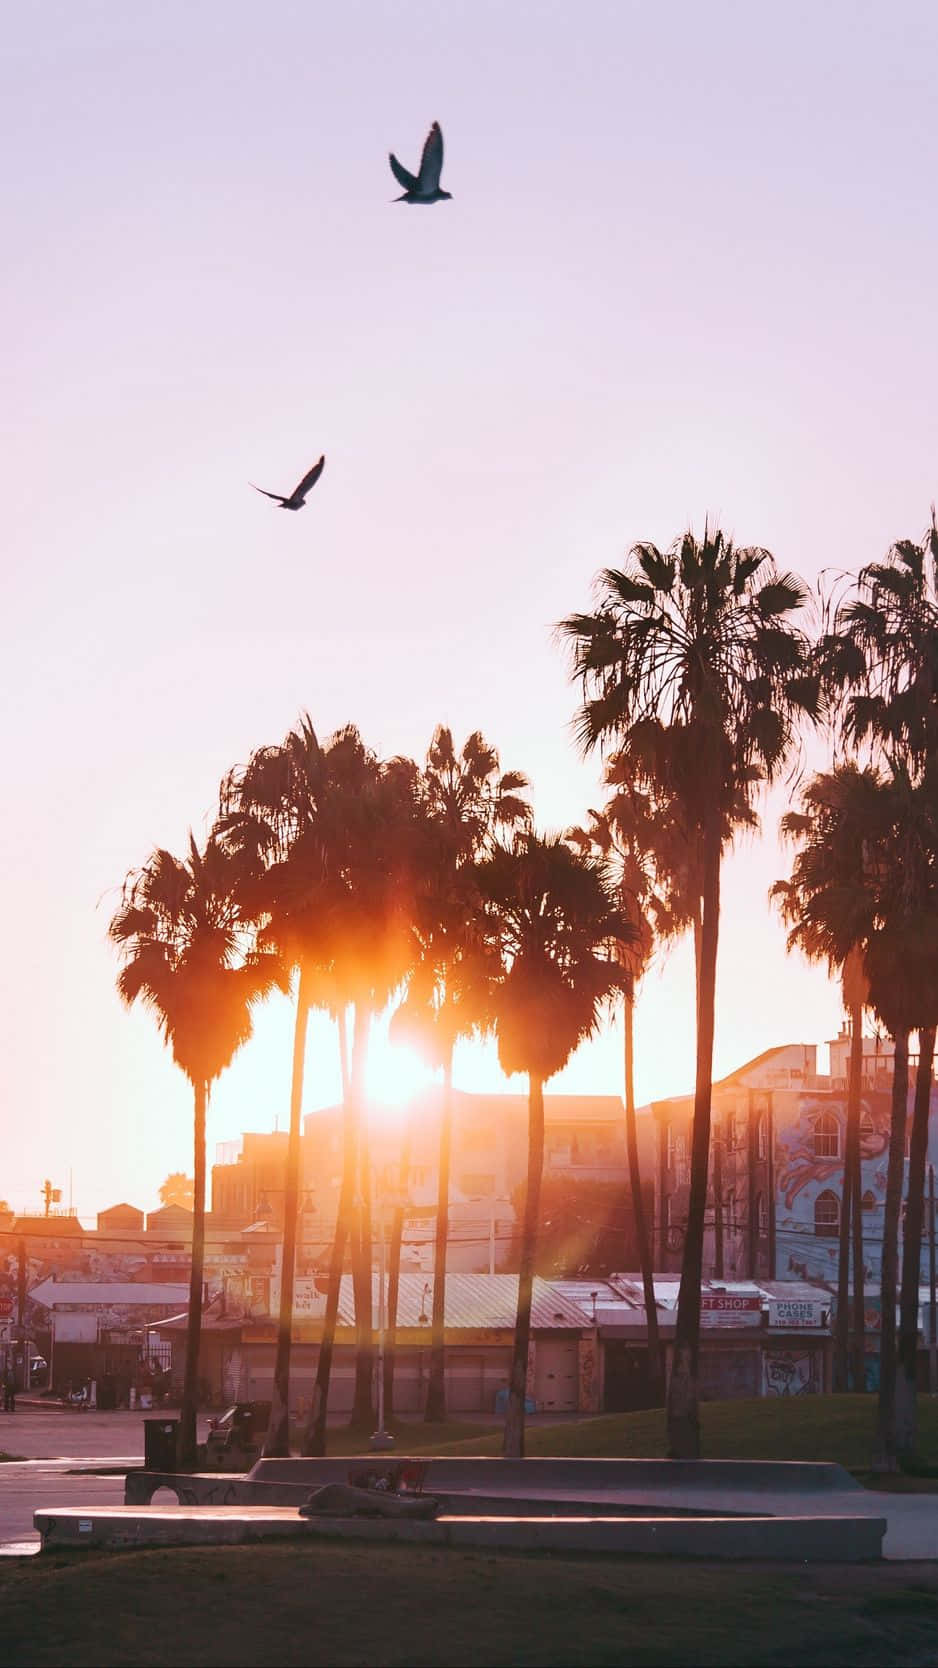 Enjoying a sunny day in Los Angeles with your iPhone Wallpaper